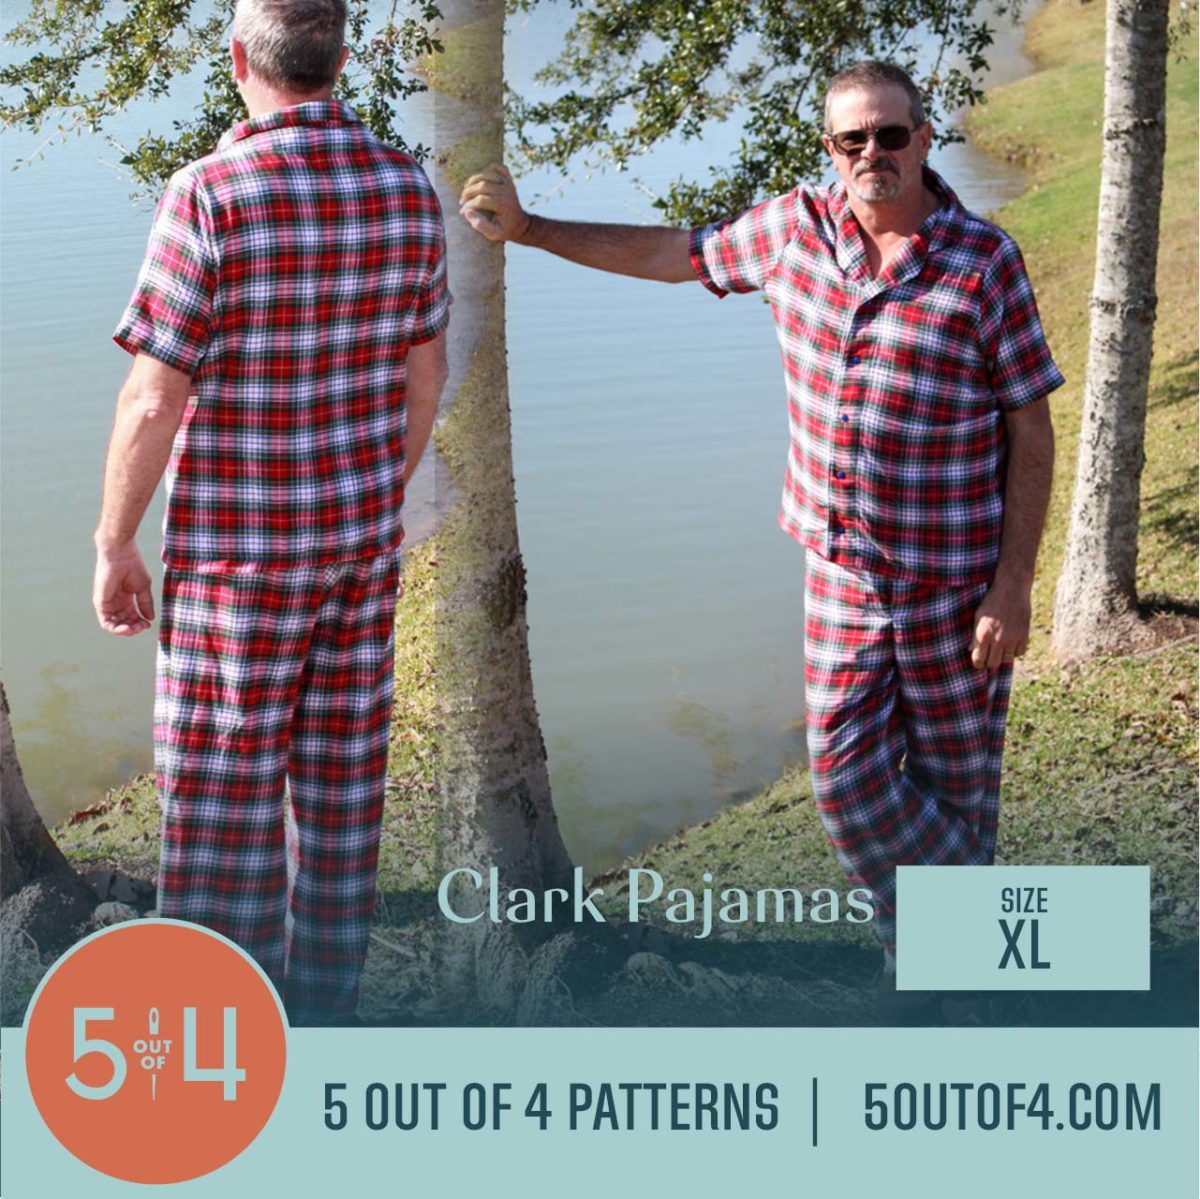 5oo4 Woven Pajama Pattern for Men size XL